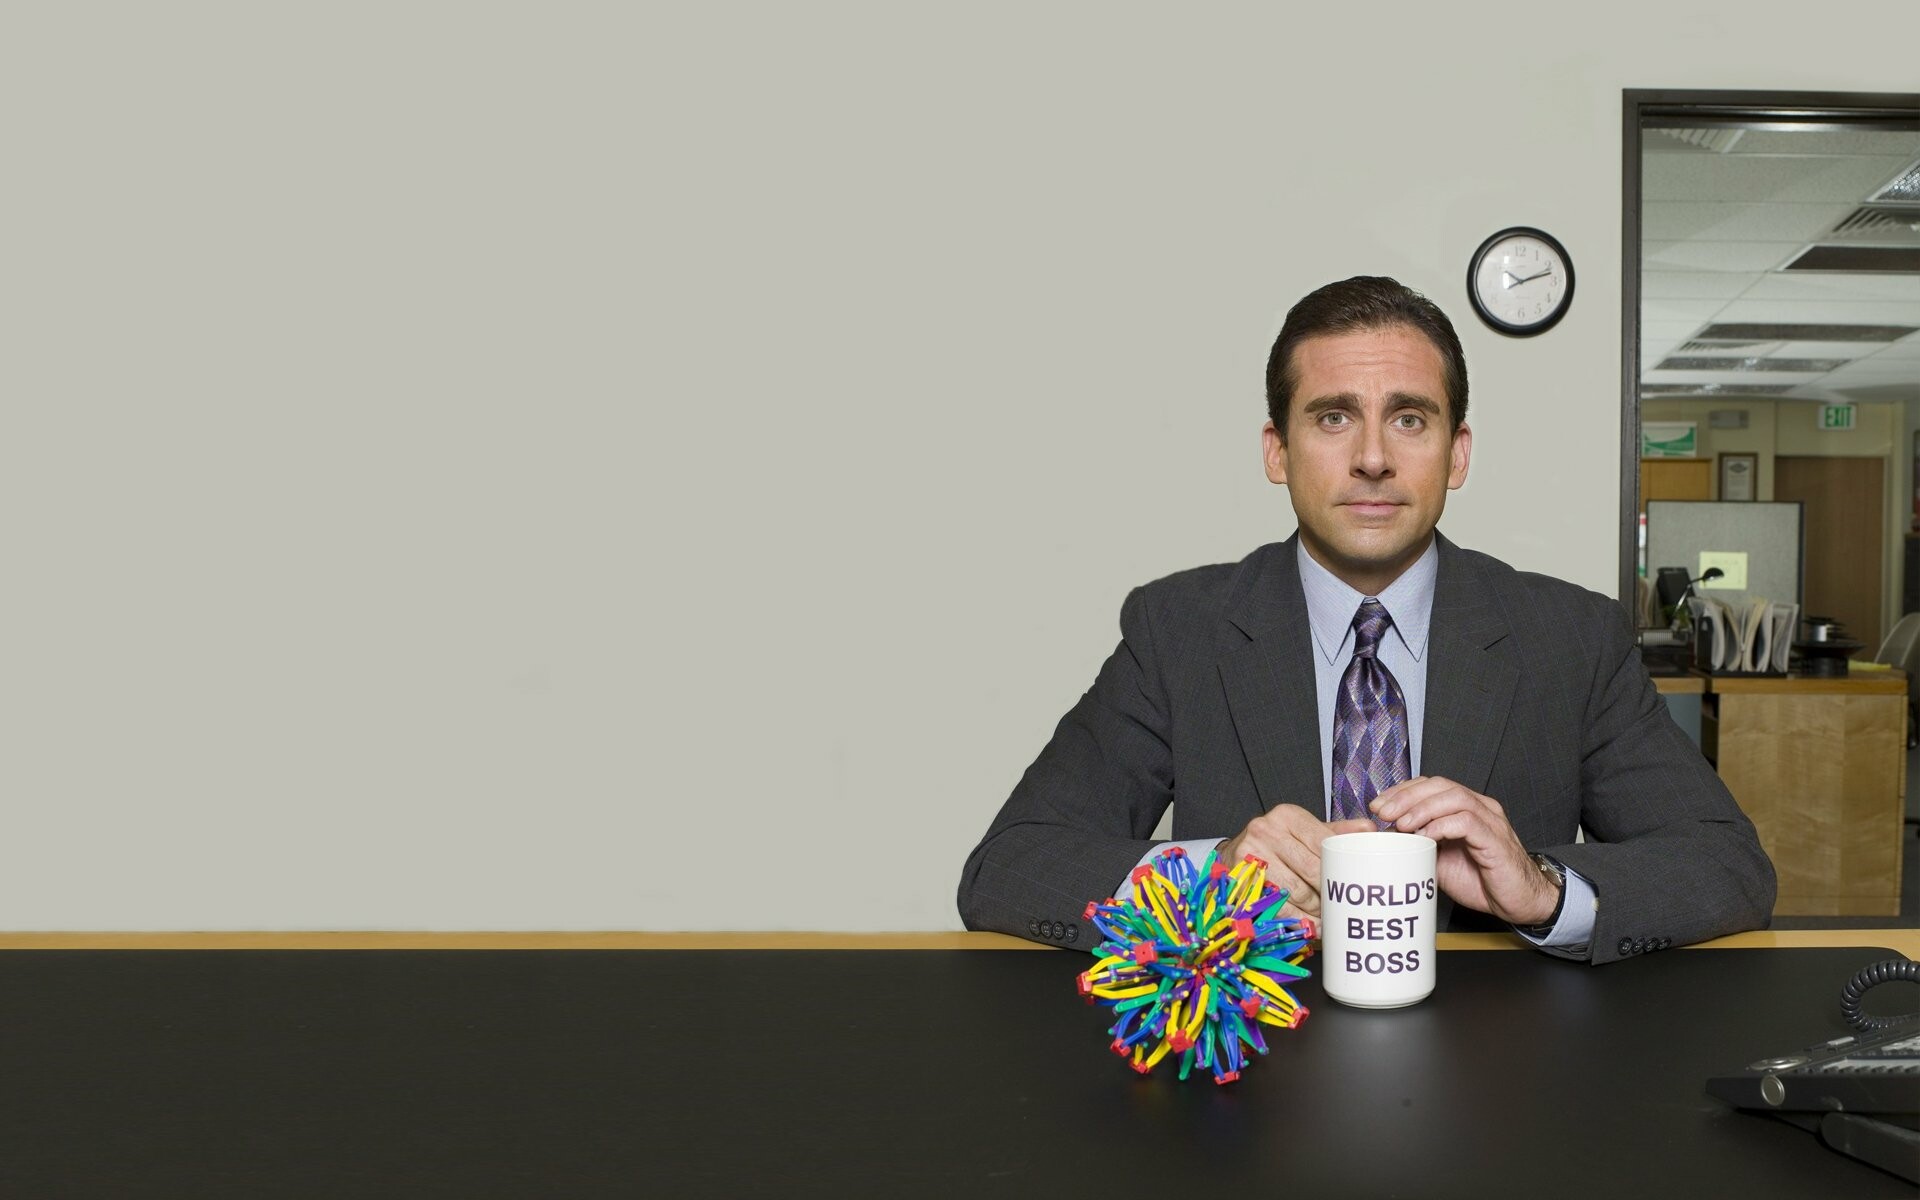 The Office (TV Series): Michael Scott, temporarily leaves the company to form his own paper company with Pam Beesly and Ryan Howard. 1920x1200 HD Background.